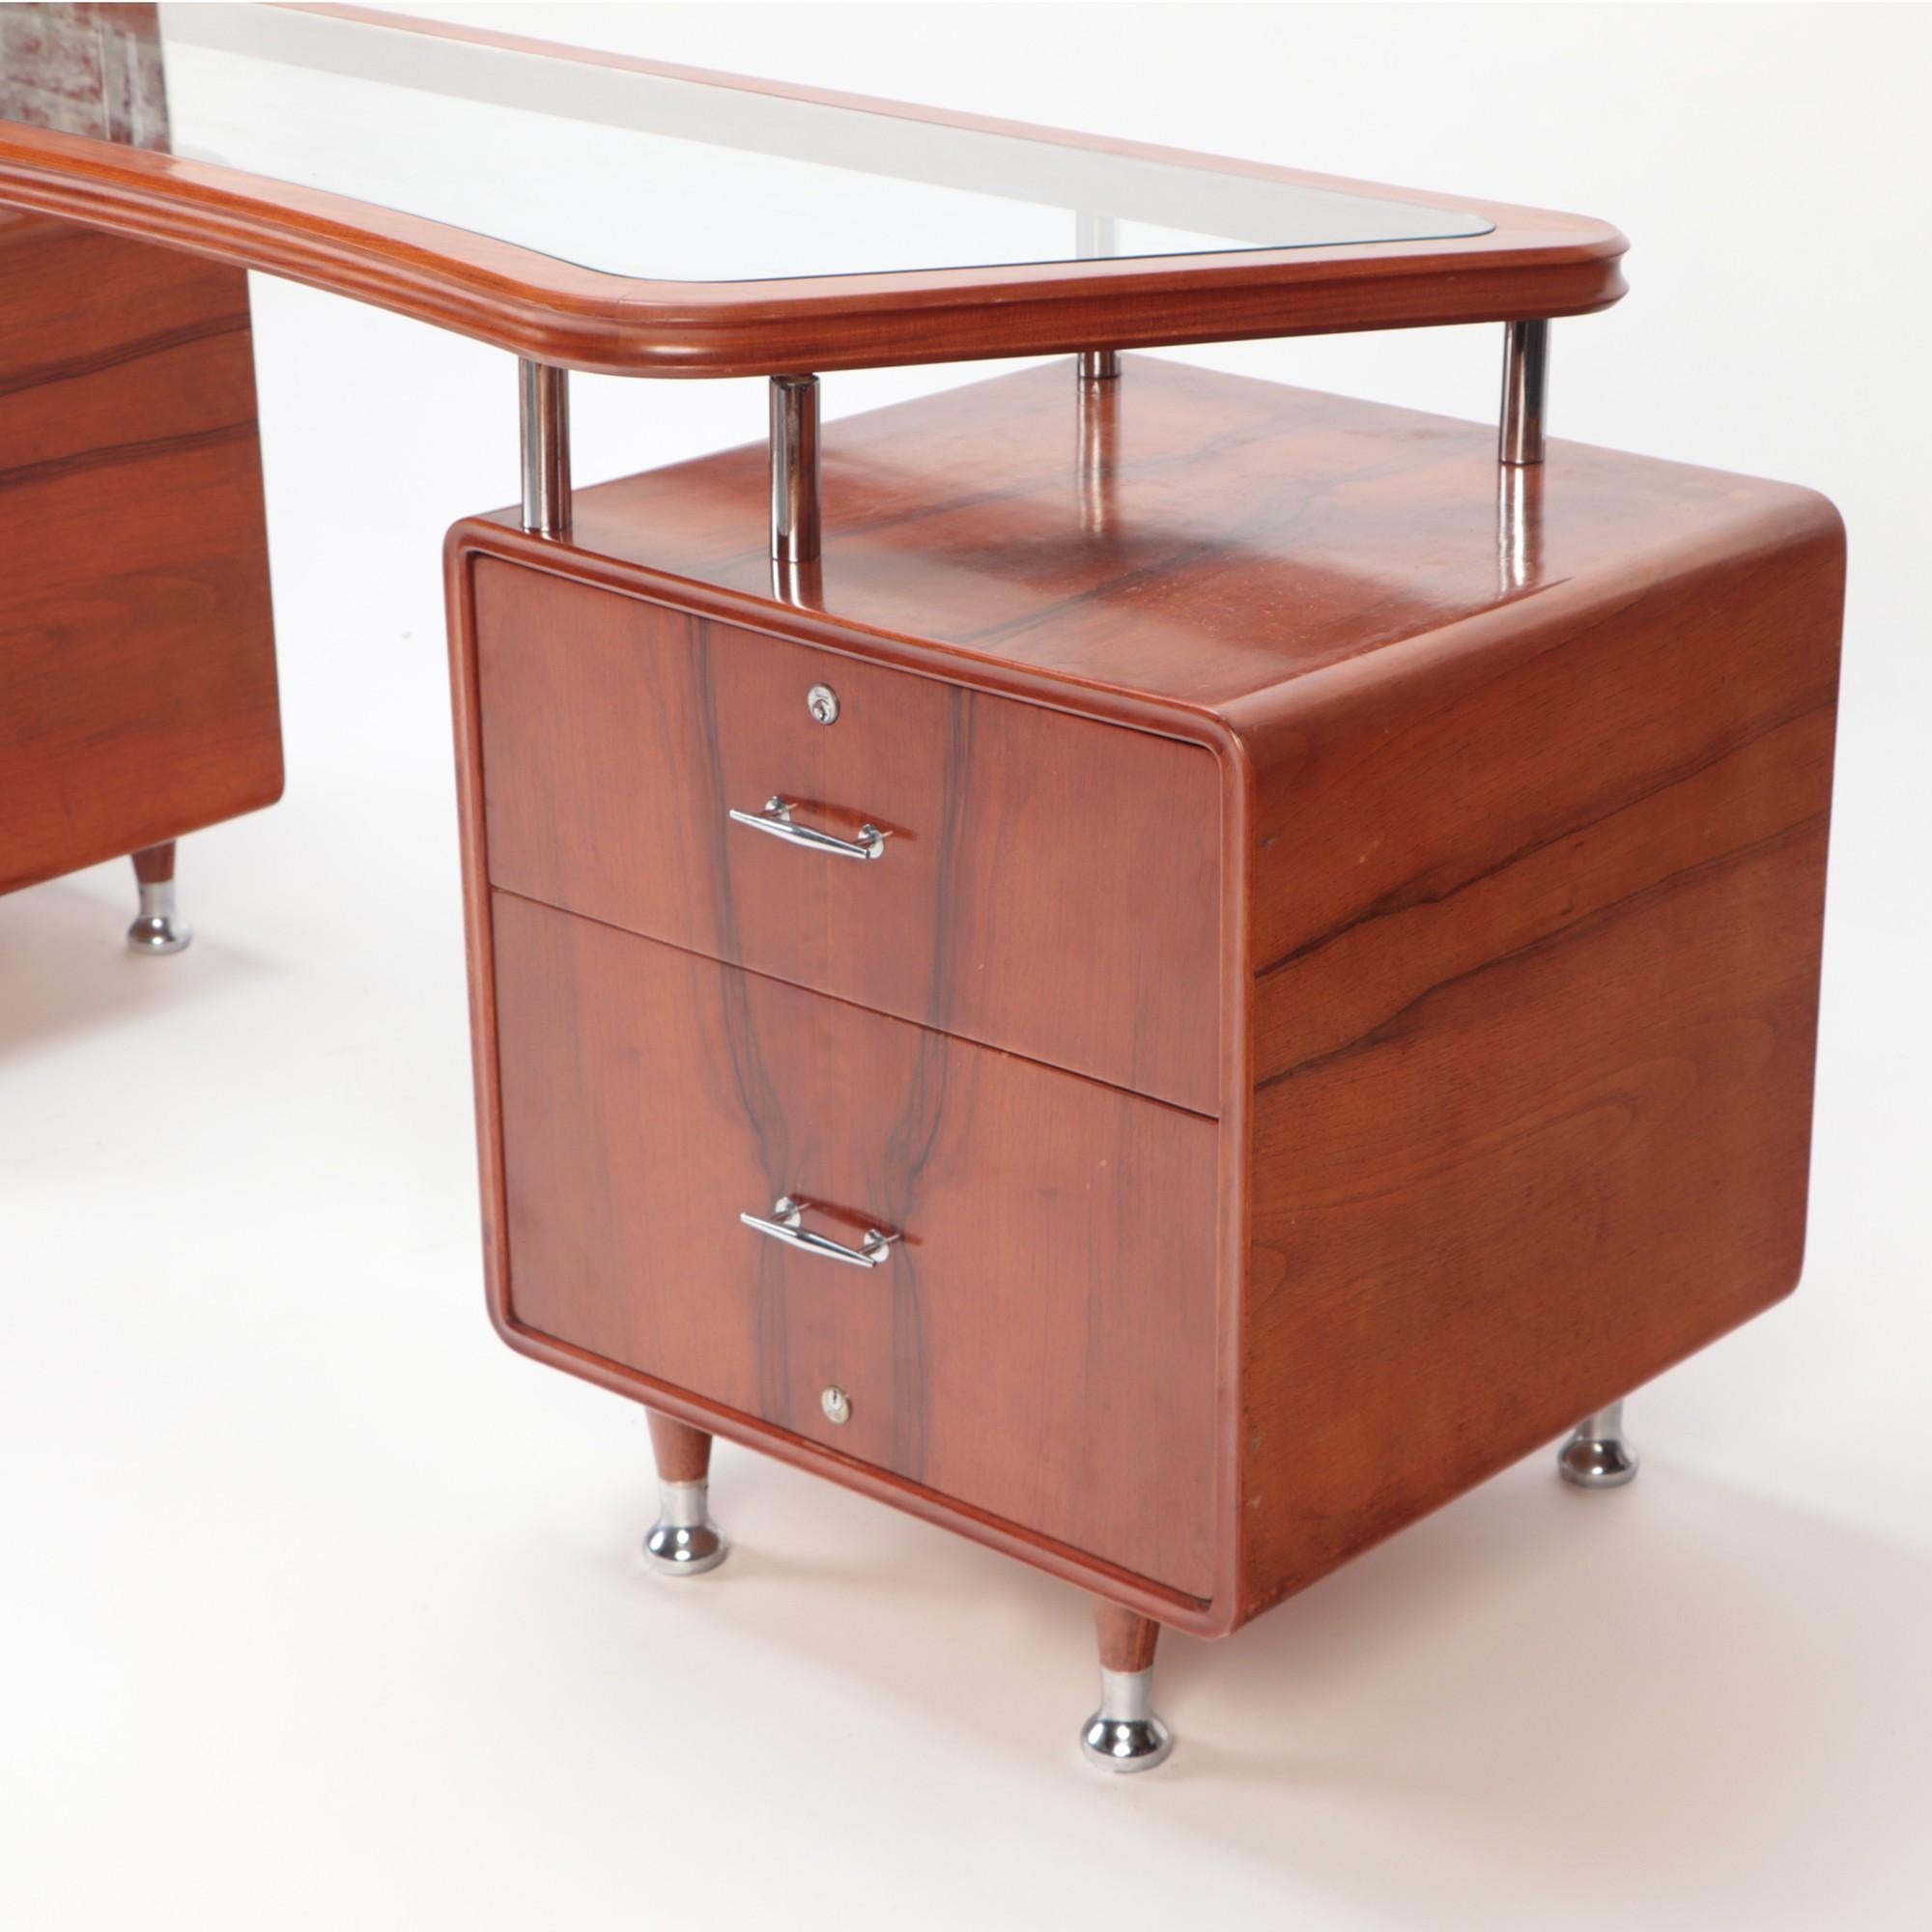 A Mid-Century Modern Double pedestal glass and wood Desk with chrome mounts C 1960. Three drawers on each side.